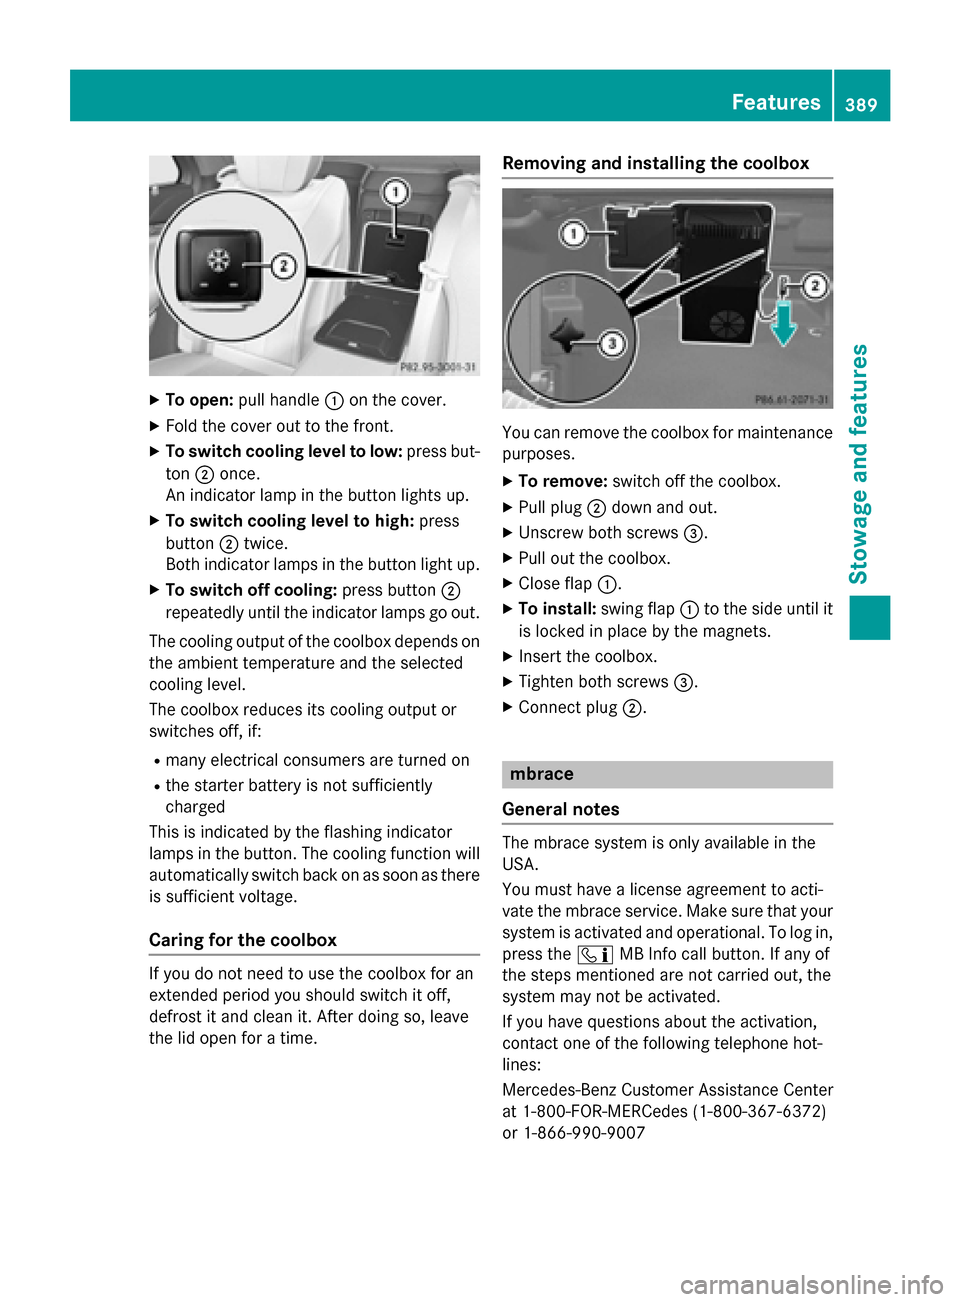 MERCEDES-BENZ S-Class 2015 W222 Manual PDF X
To open: pull handle :on the cover.
X Fold the cover out to the front.
X To switch cooling level to low: press but-
ton ;once.
An indicator lamp in the button lights up.
X To switch cooling level to